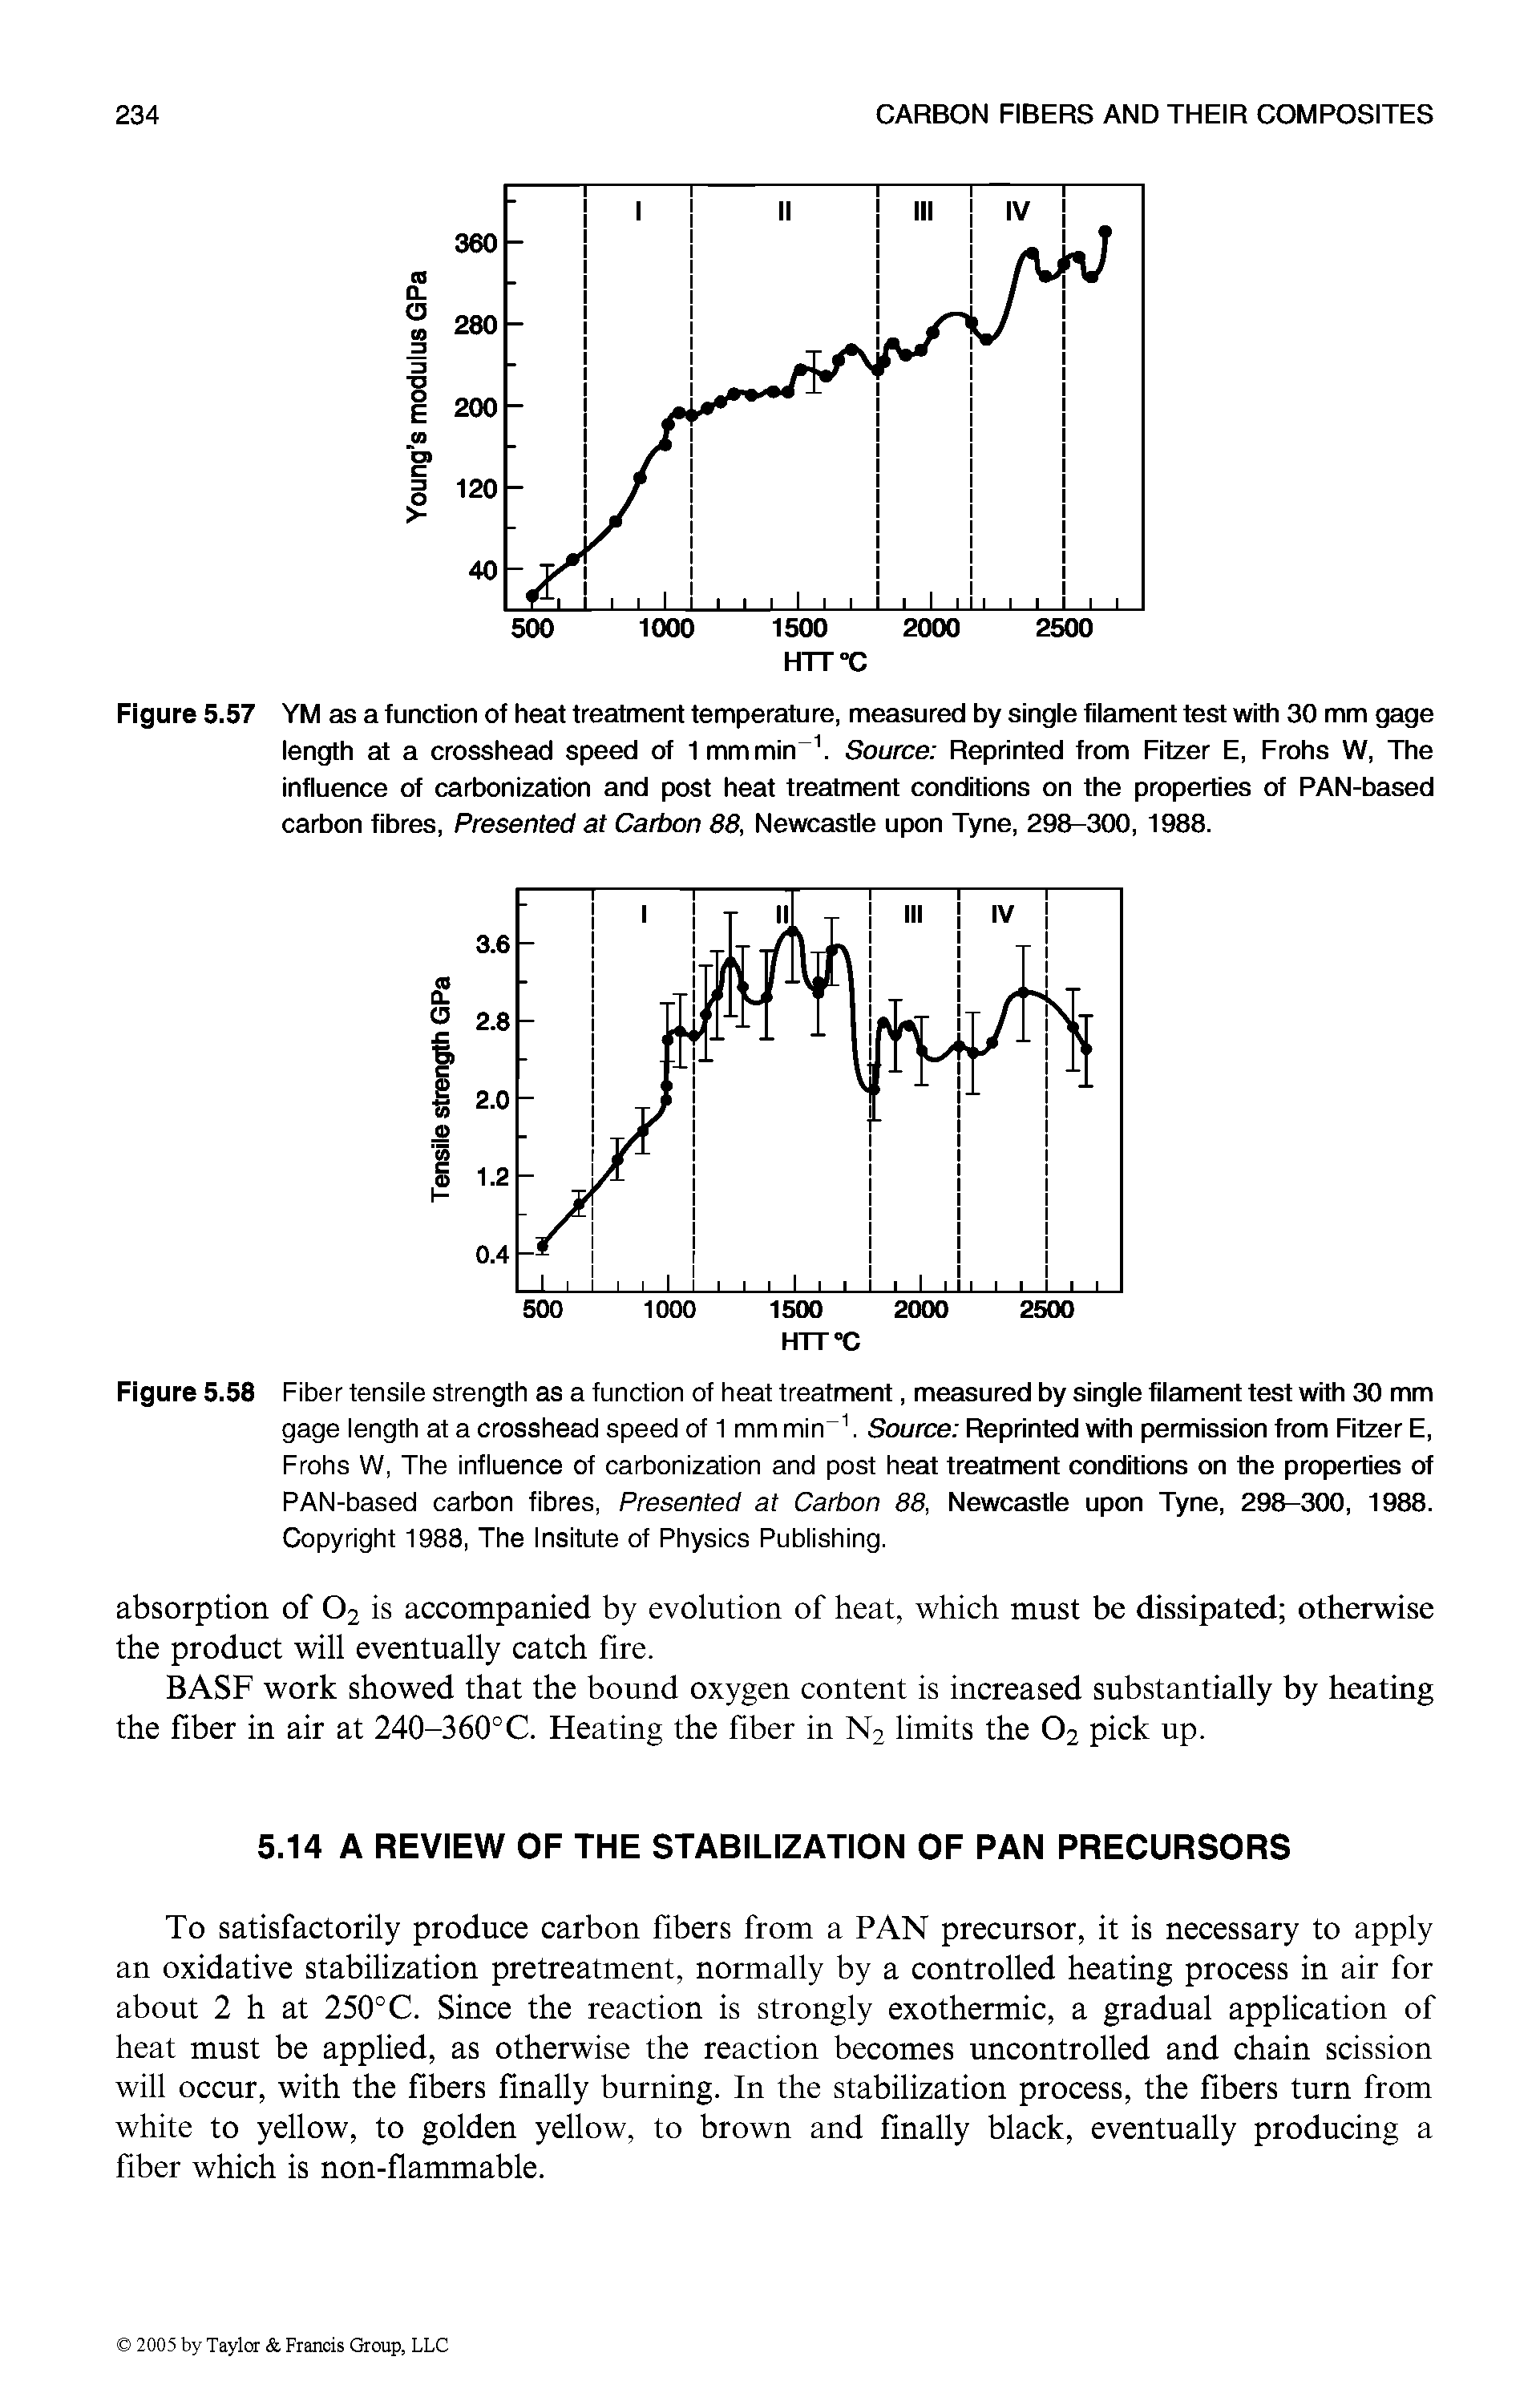 Figure 5.58 Fiber tensile strength as a function of heat treatment, measured by single filament test with 30 mm gage length at a crosshead speed of 1 mm min Source Reprinted with permission from Fitzer E, Frohs W, The influence of carbonization and post heat treatment conditions on the properties of PAN-based carbon fibres, Presented at Carbon 88, Newcastle upon Tyne, 298-300, 1988. Copyright 1988, The Insitute of Physics Publishing.